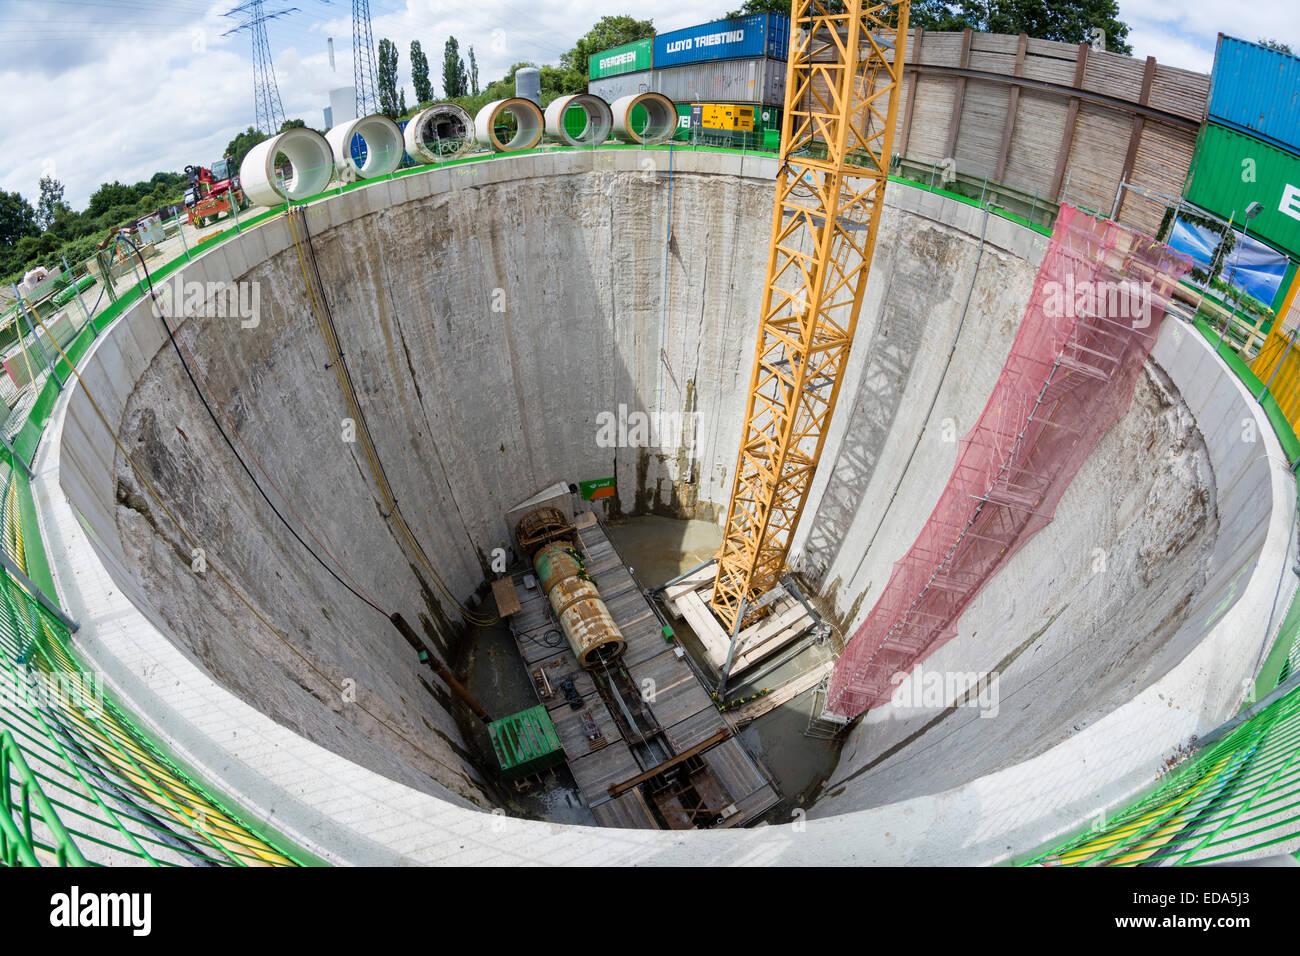 A 22 meter deep well is part of a construction site of the river Emscher sewer tunnel. Stock Photo